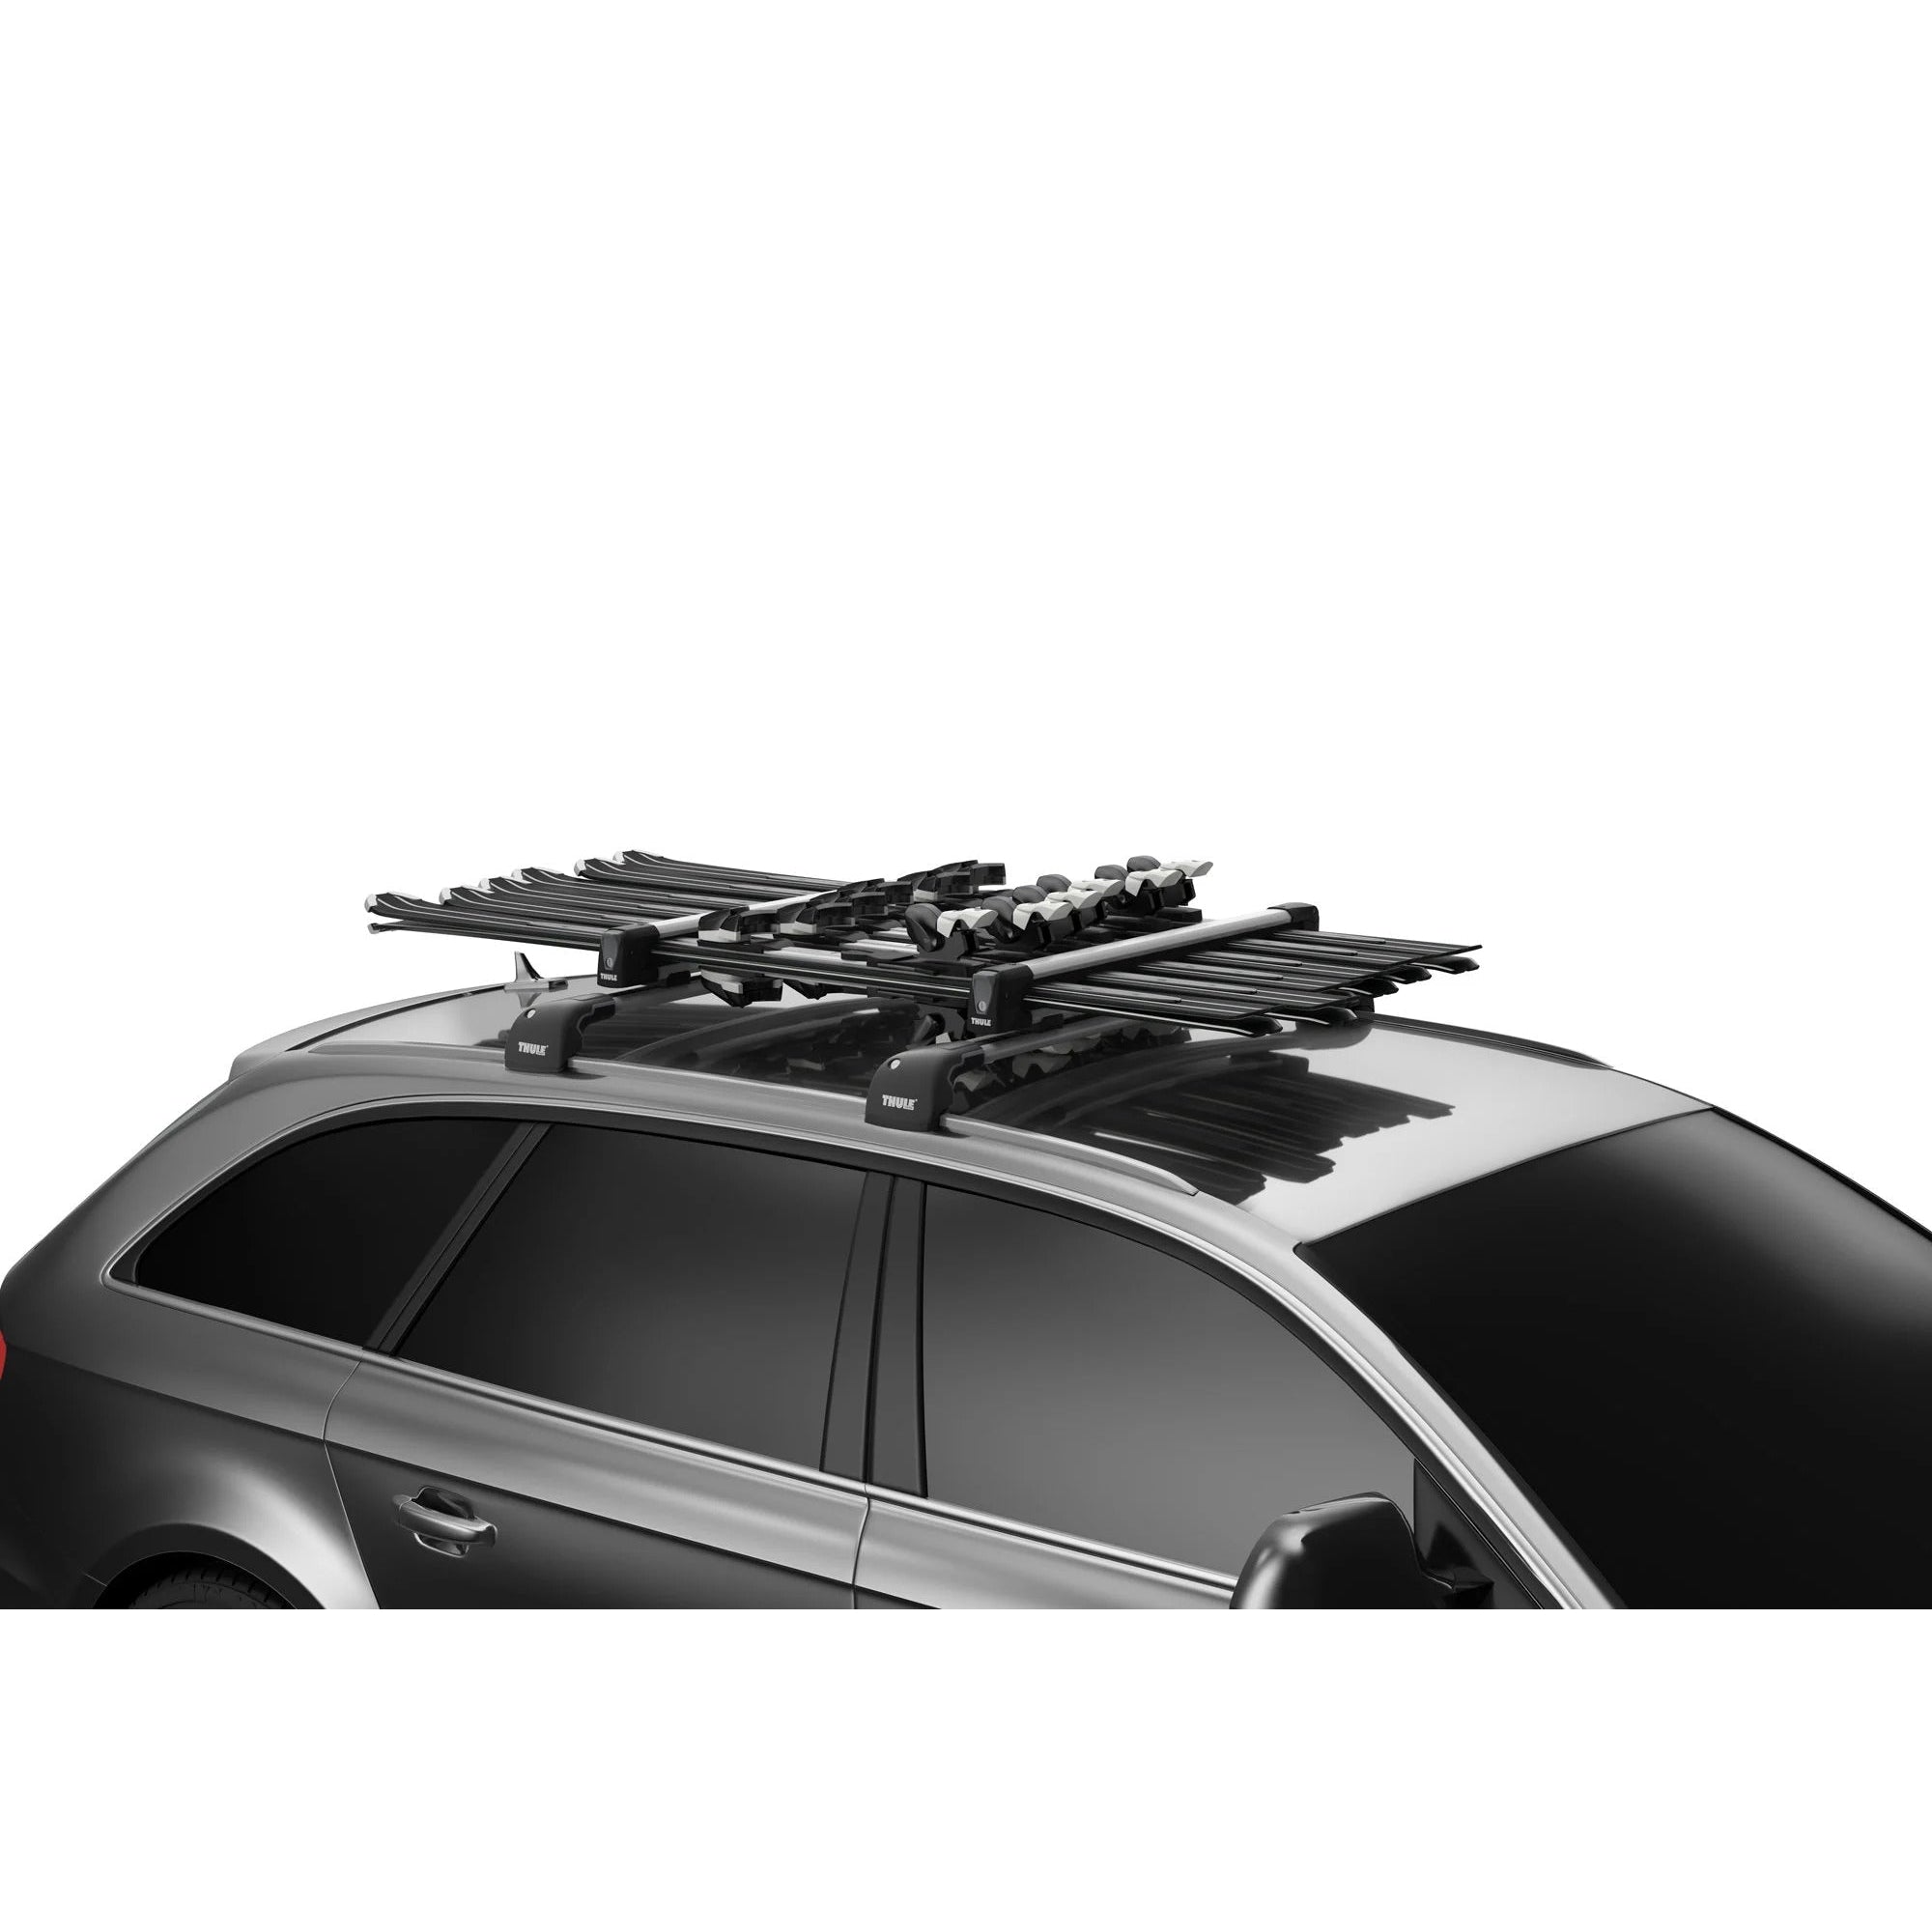 Roof Rack Accessory: Ski/Snowboard Carrier | Thule SnowPack L (732615) -  Mazda Shop | Genuine Mazda Parts and Accessories Online